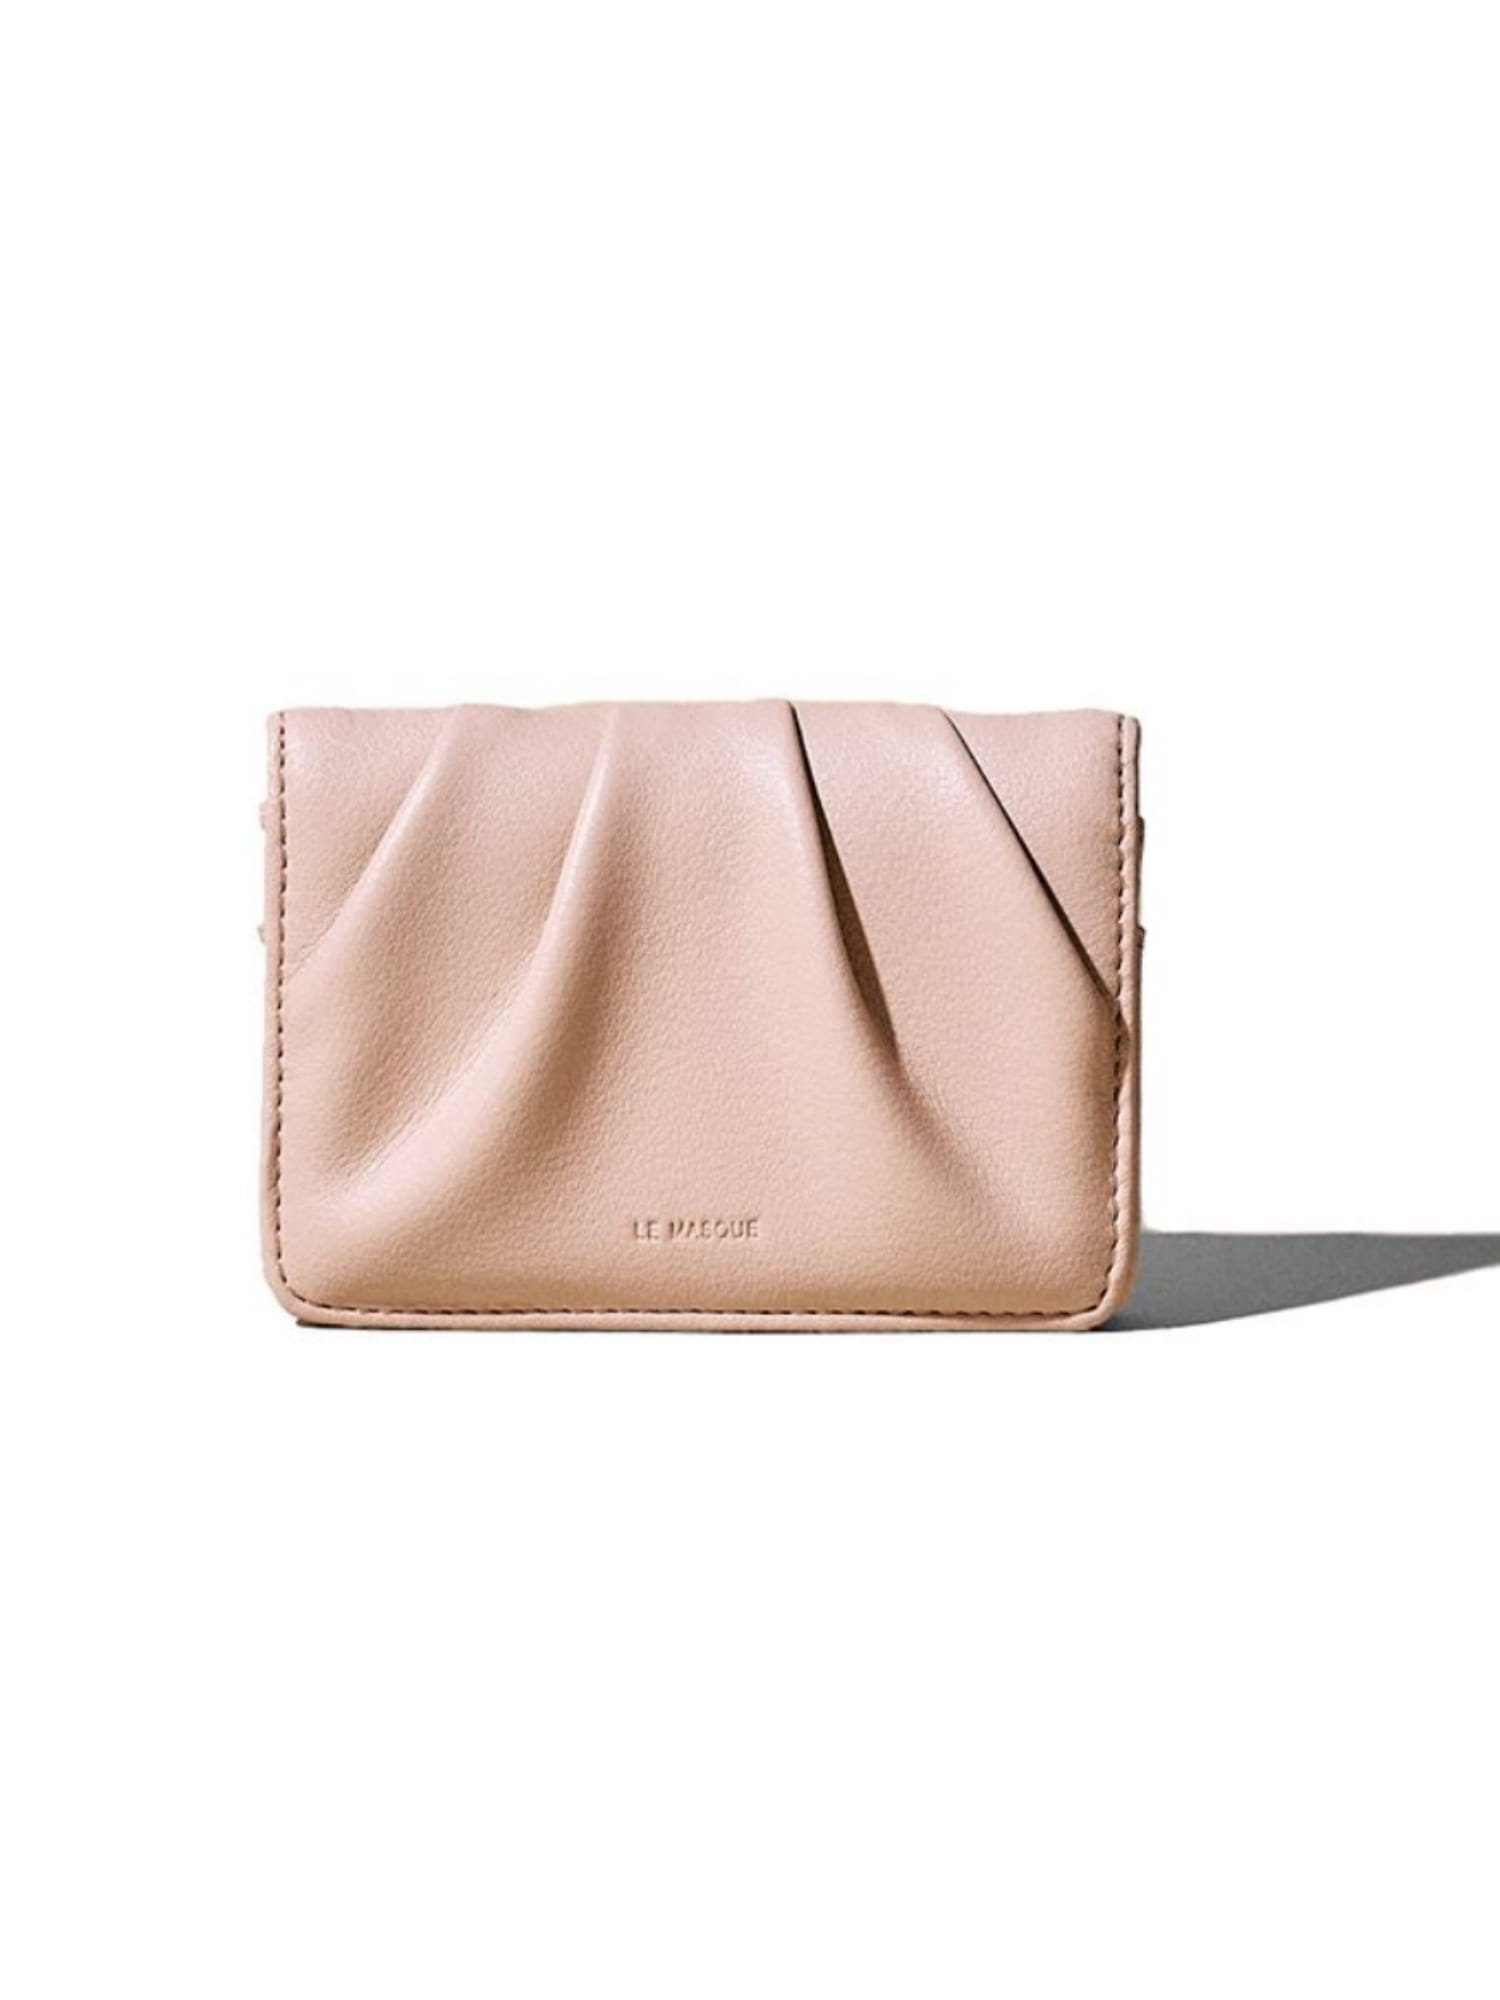 DOUGH Soft Leather Card Case Wallet - Powder Pink